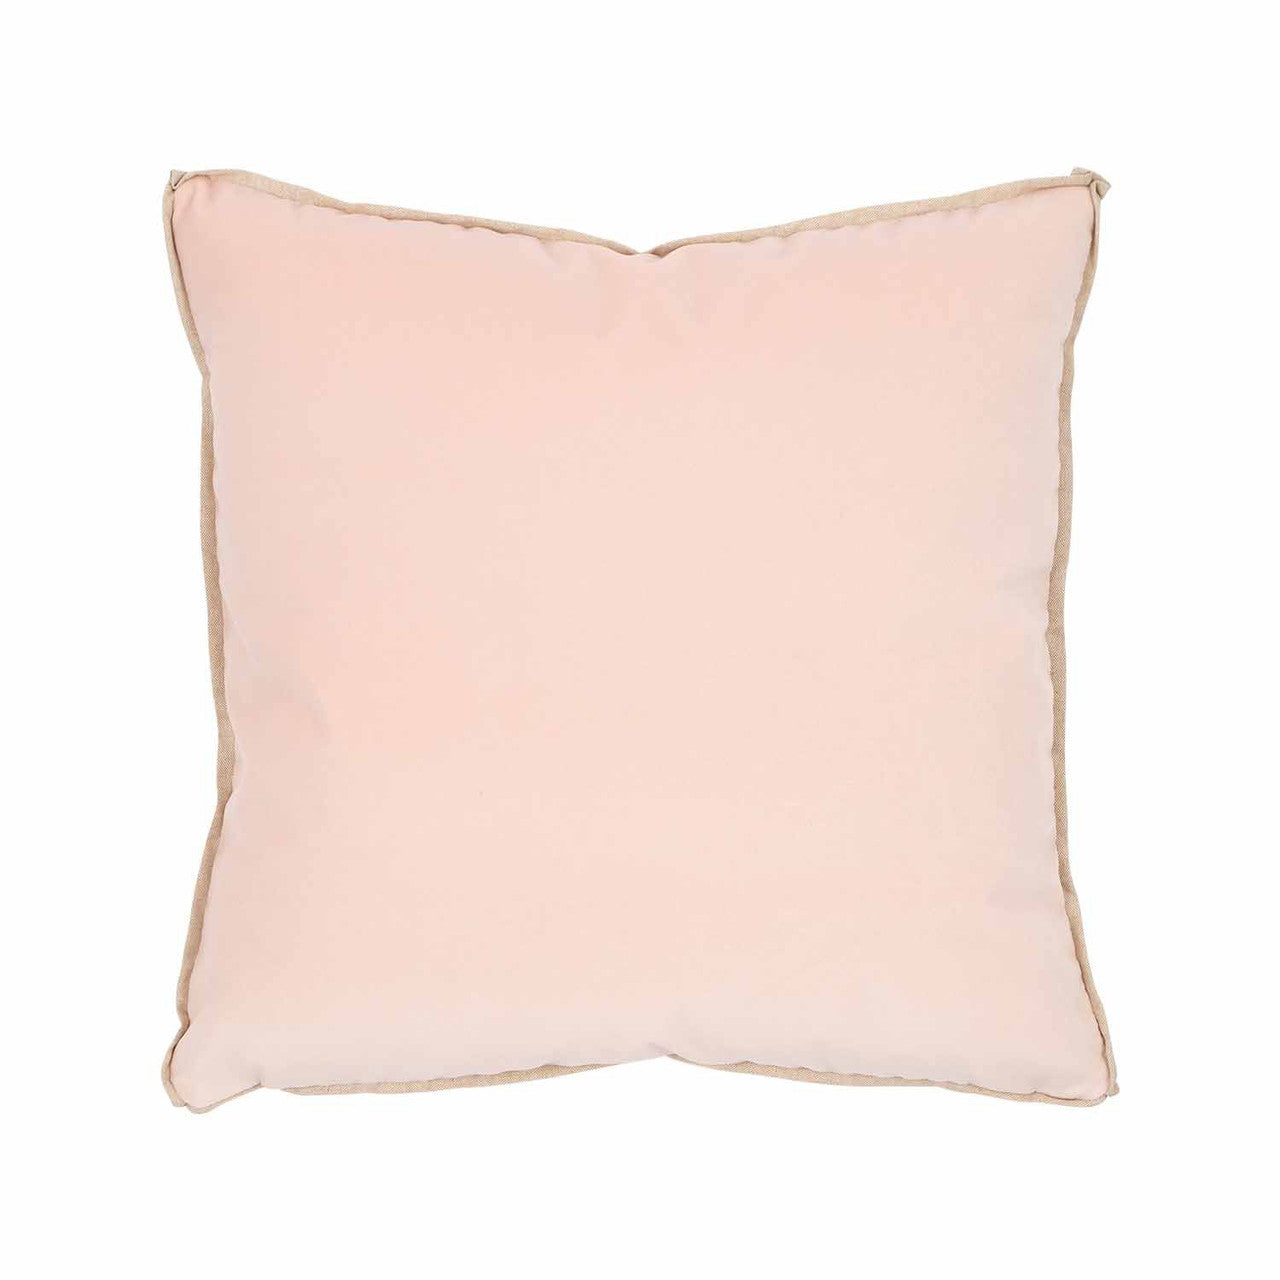 Banks Pillow in Charming